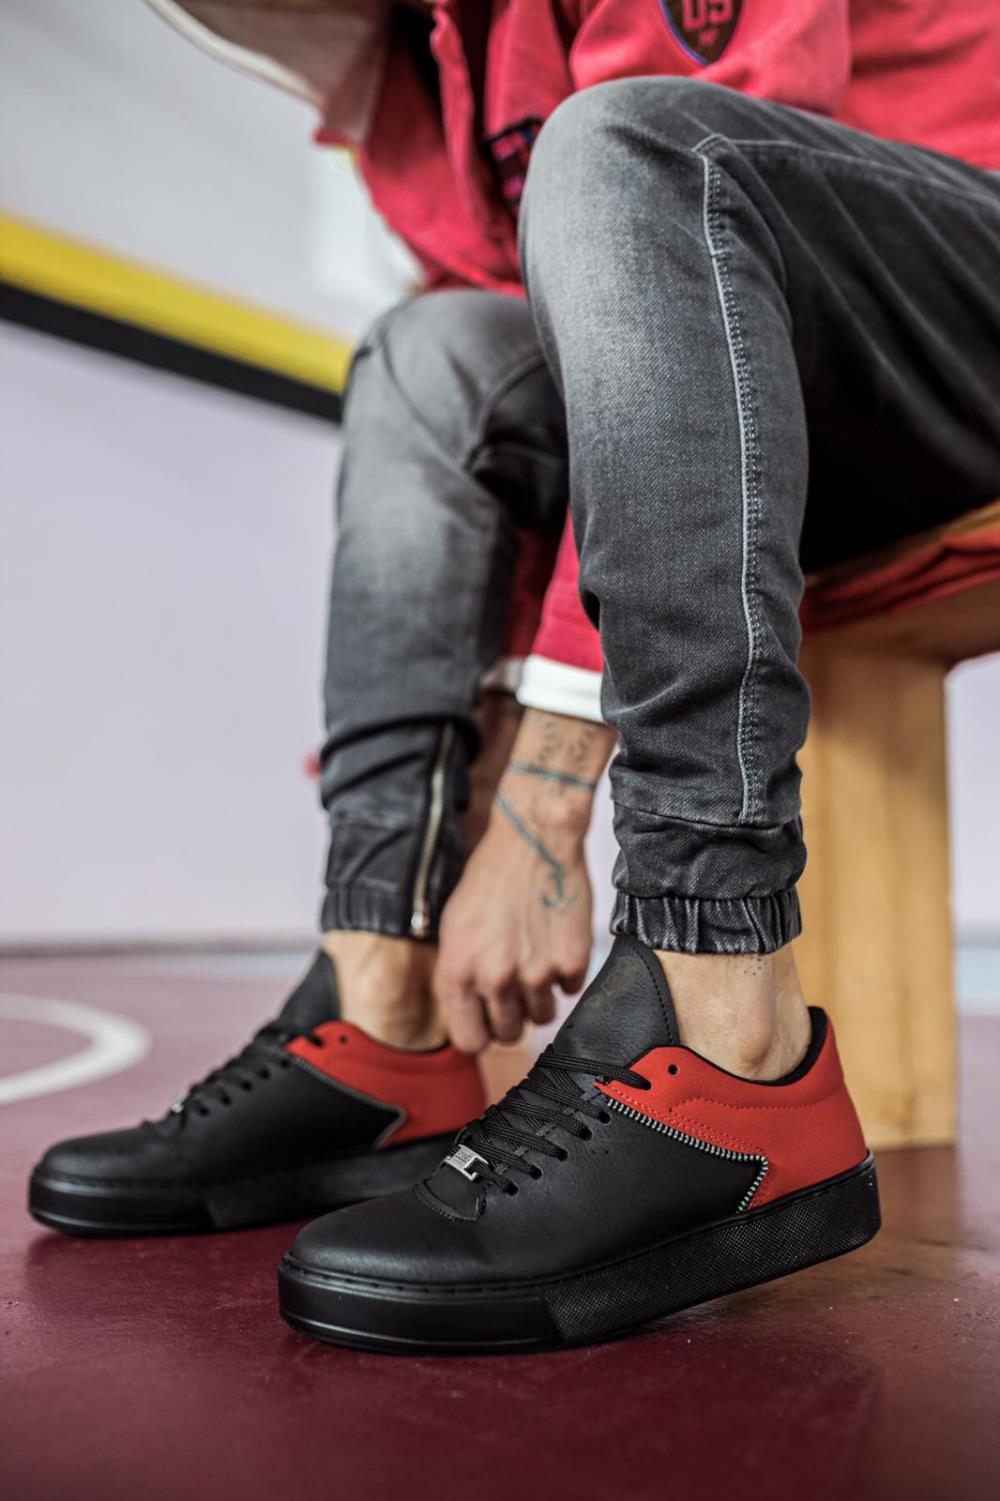 Men's Black Red Casual Sneaker Sports Shoes - STREET MODE ™